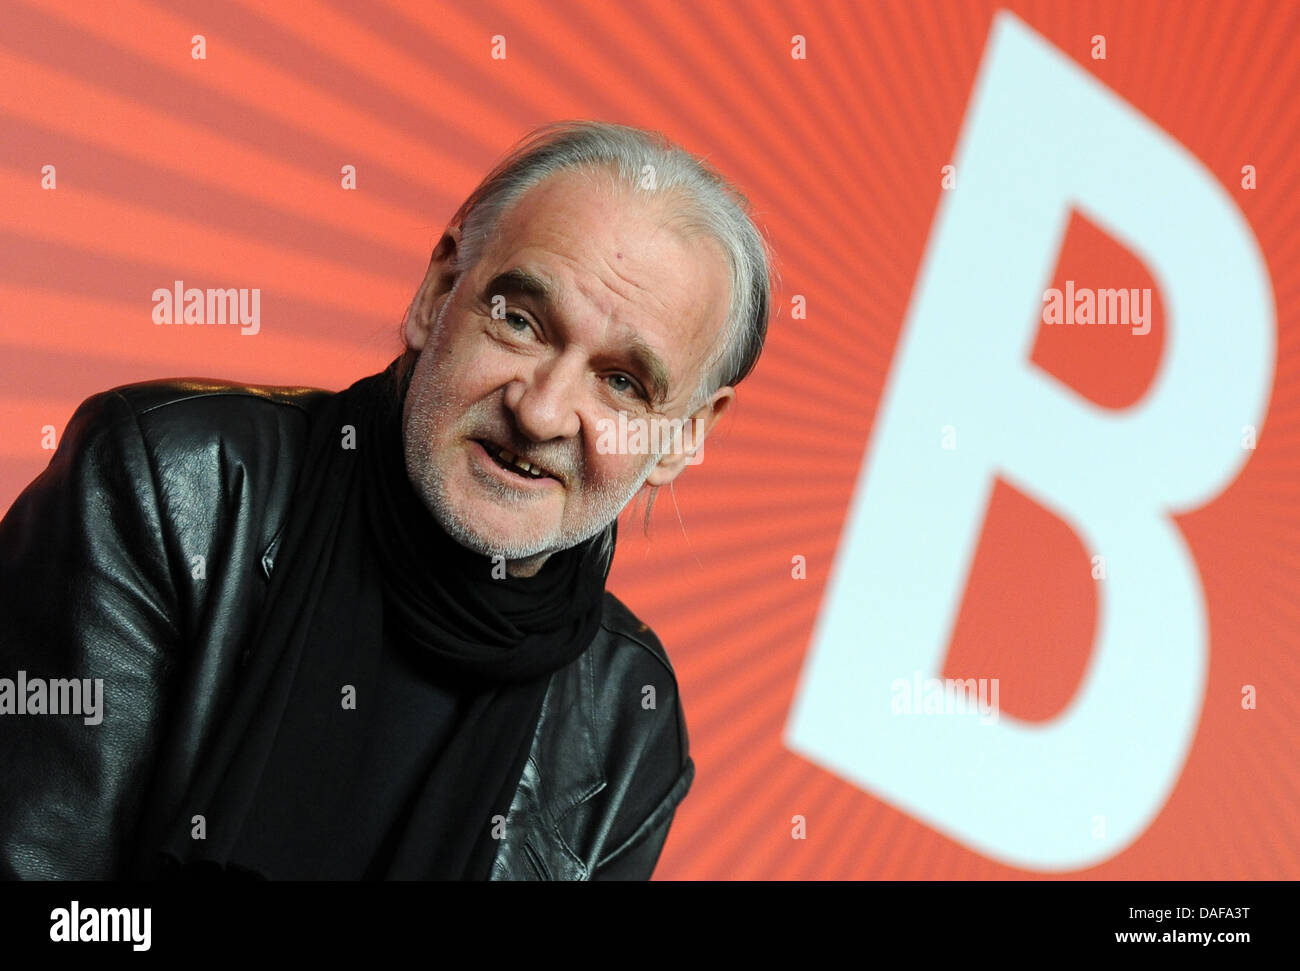 Hungarian director Bela Tarr attends the press conference of the film 'The Turin Horse' ('A torinoi lo') during the 61st Berlin International Film Festival in Berlin, Germany, 15 February 2011. The film is shown in the competition program section of the International Film Festival. The 61st Berlinale takes place from 10 to 20 February 2011. Photo: Brita Pedersen Stock Photo